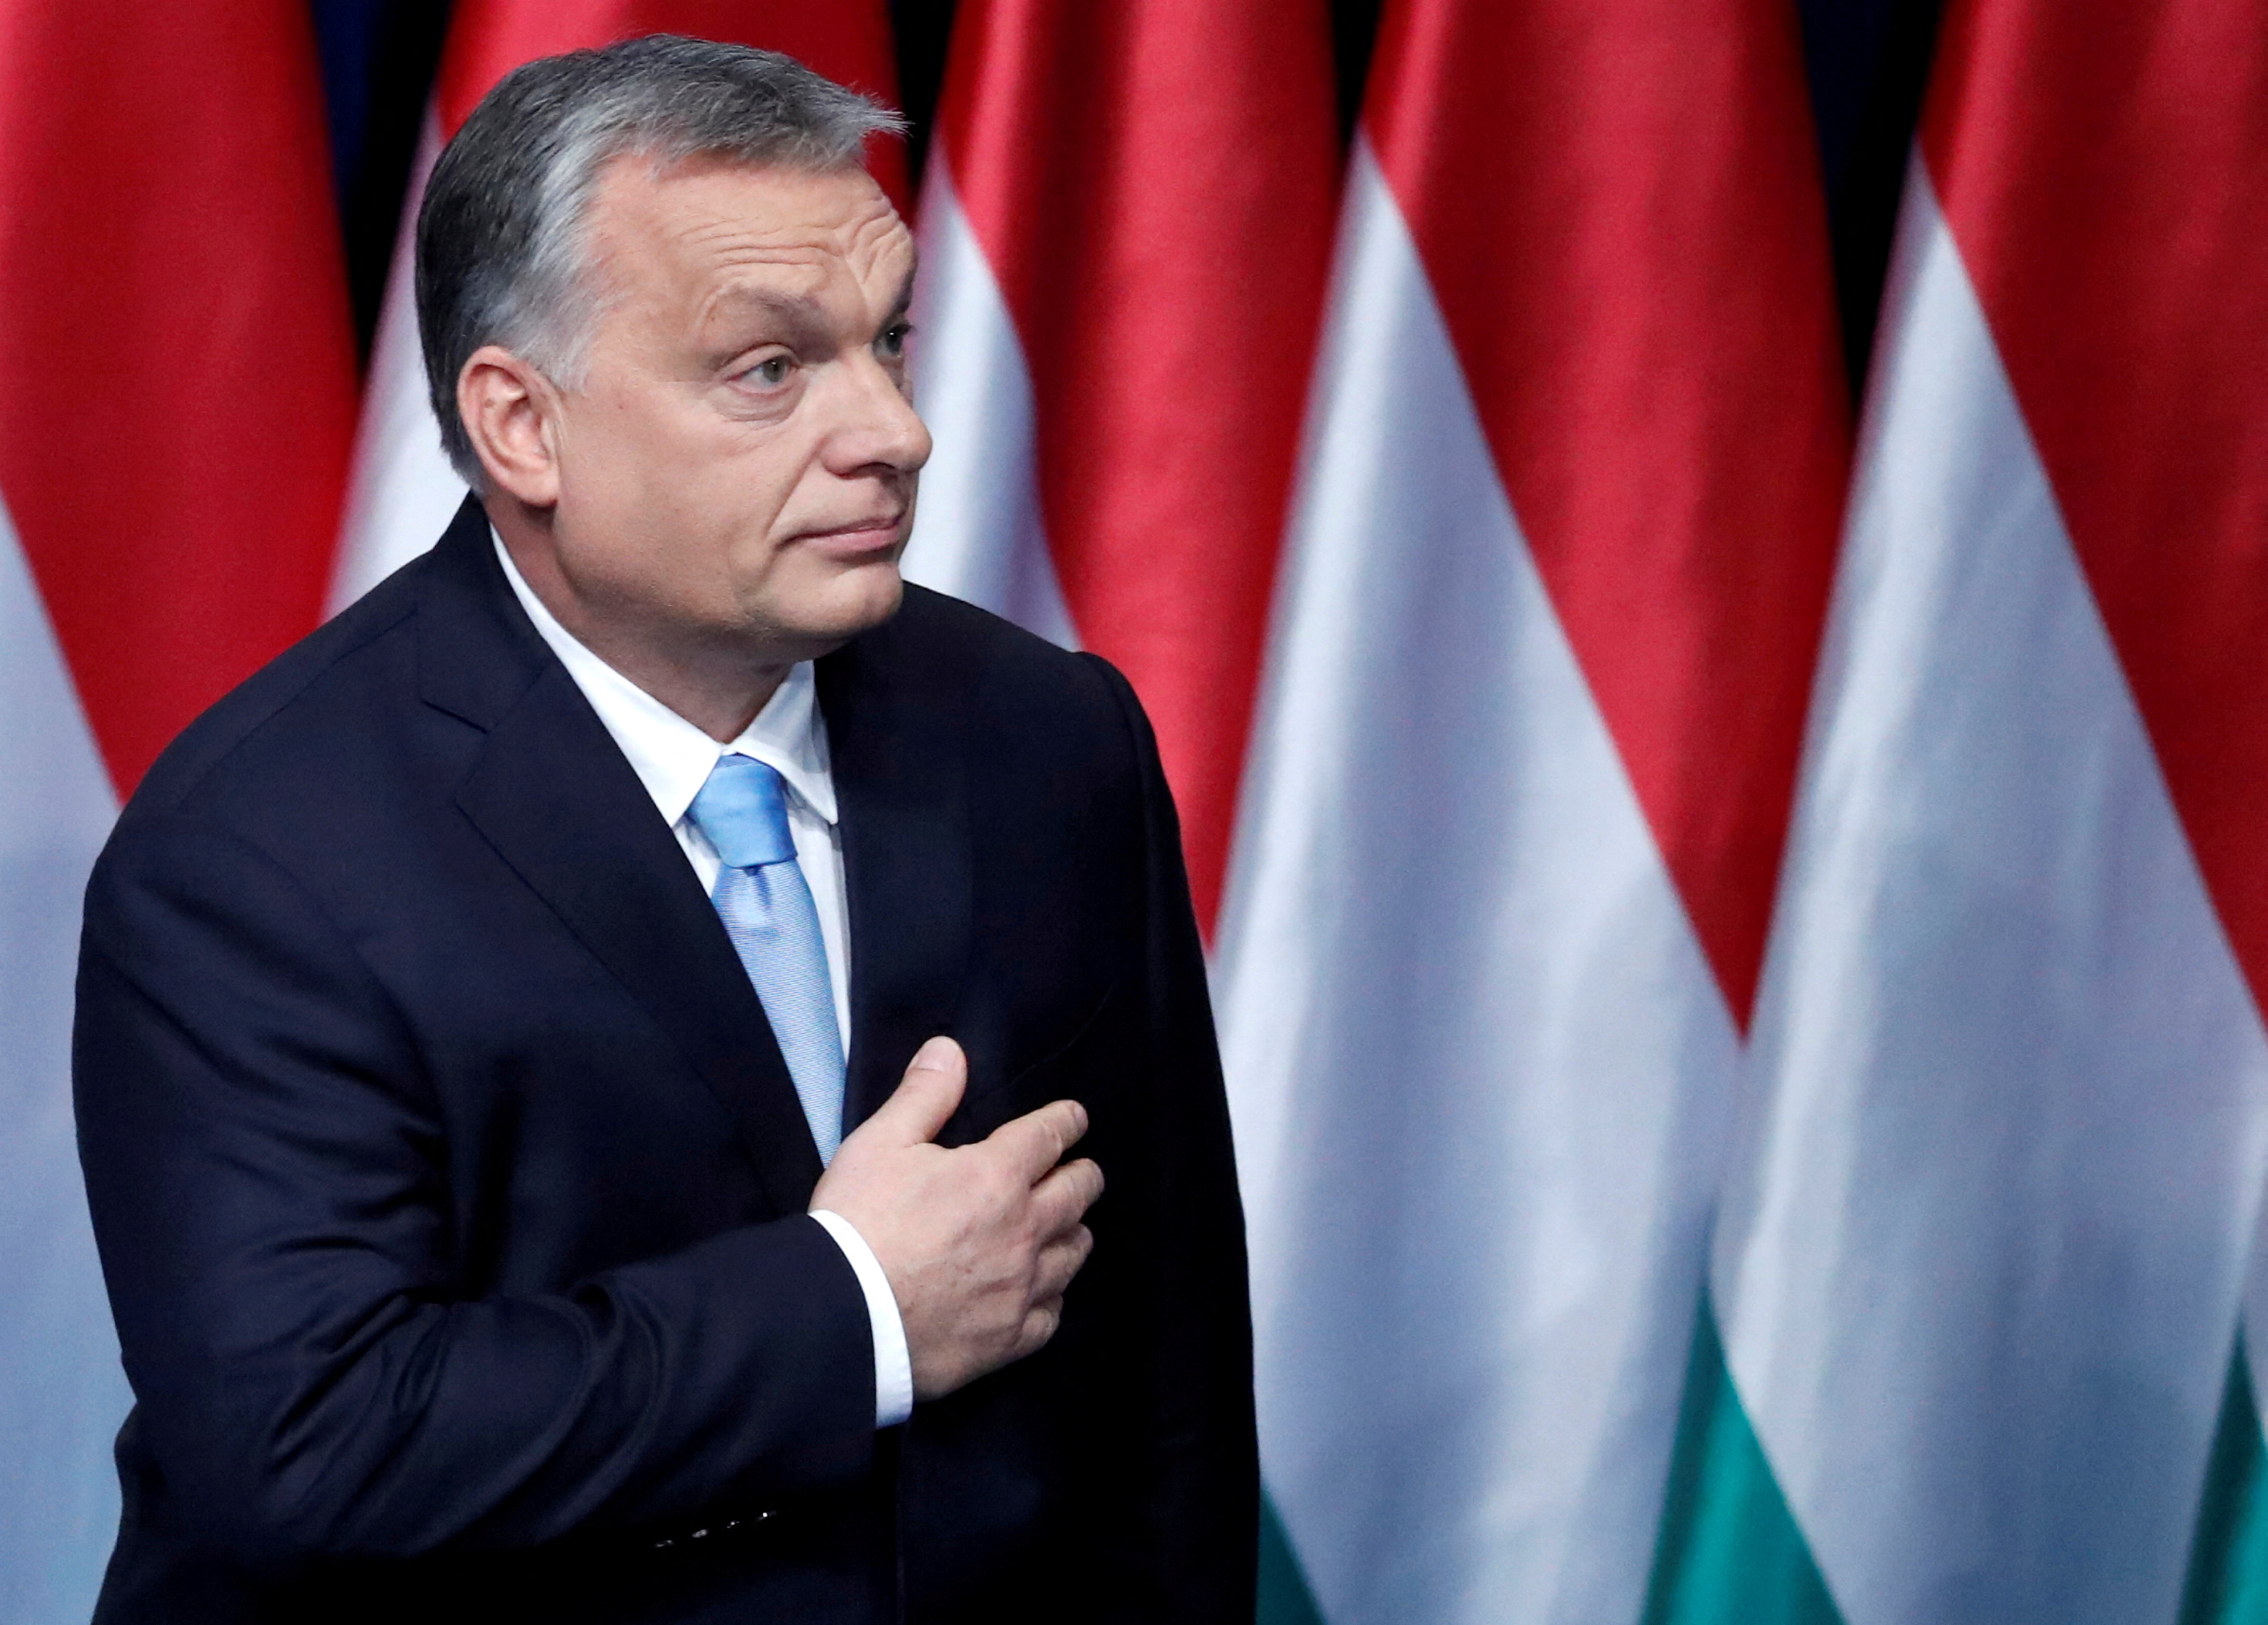 Hungarian Prime Minister Orban delivers his annual State of the Nation Address